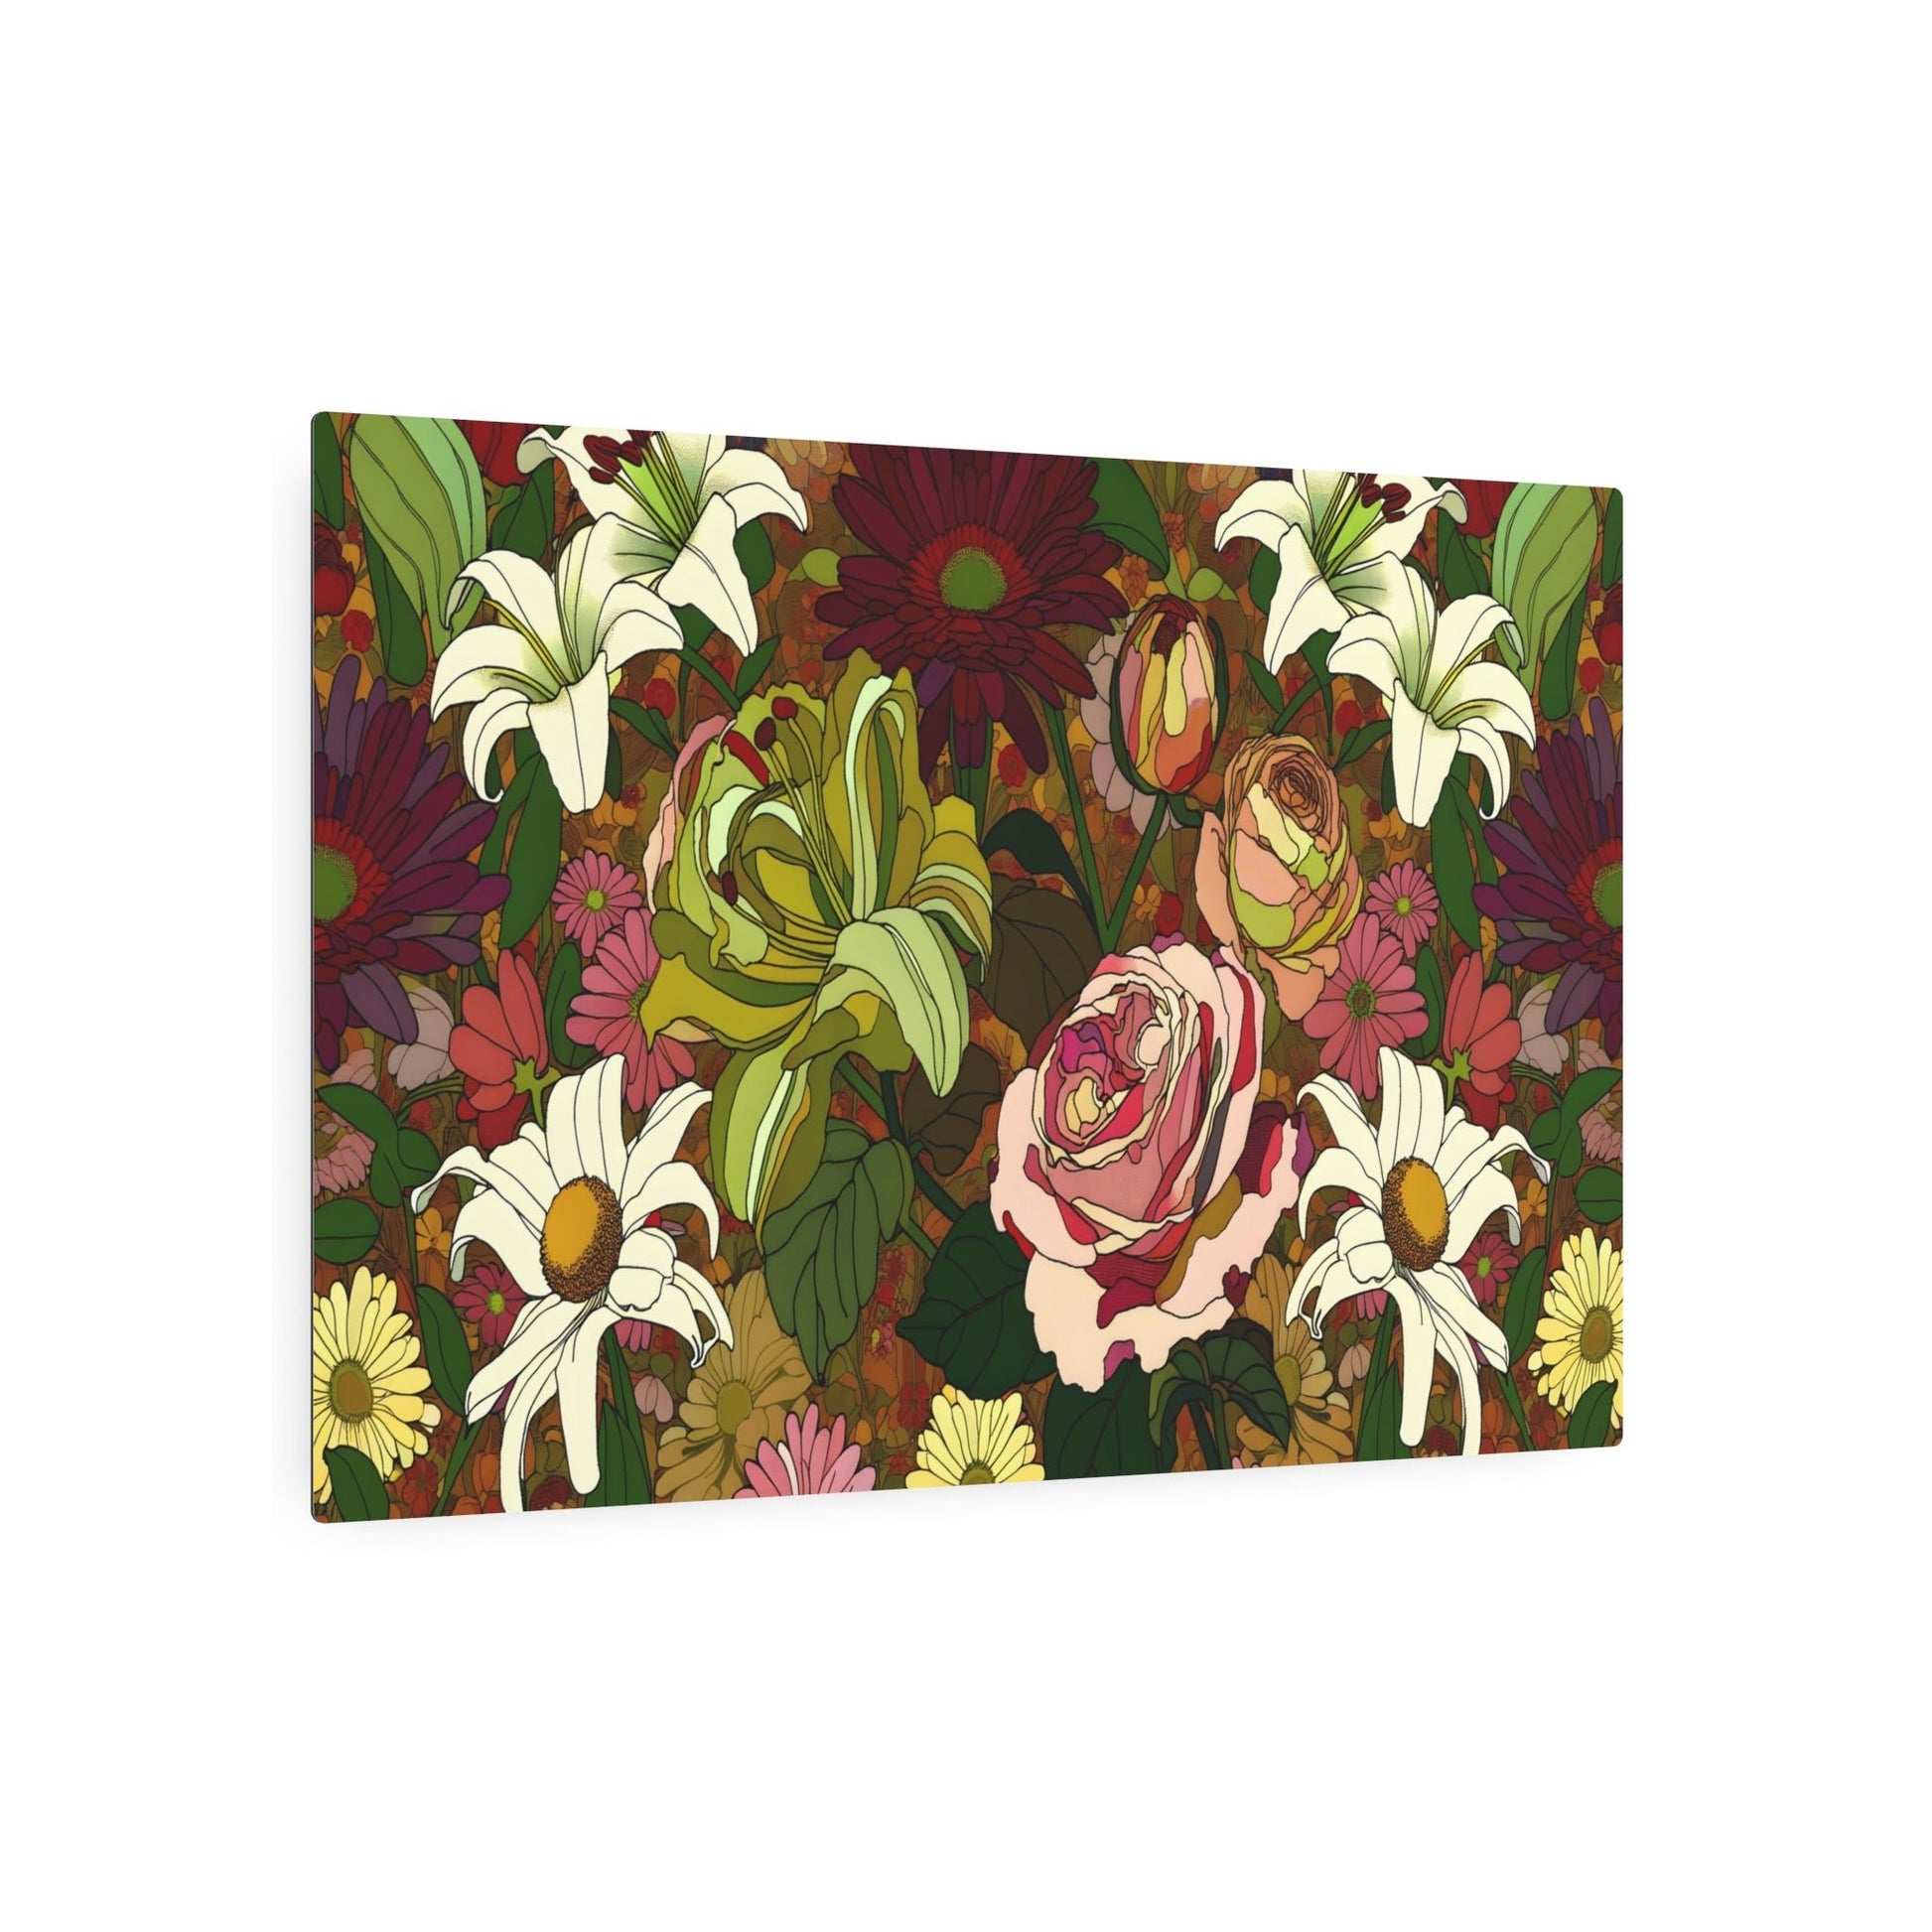 Metal Poster Art | "Art Nouveau Style Garden Flowers Image - Variety of Floral Designs in Western Art Styles Collection" - Metal Poster Art 36″ x 24″ (Horizontal) 0.12''